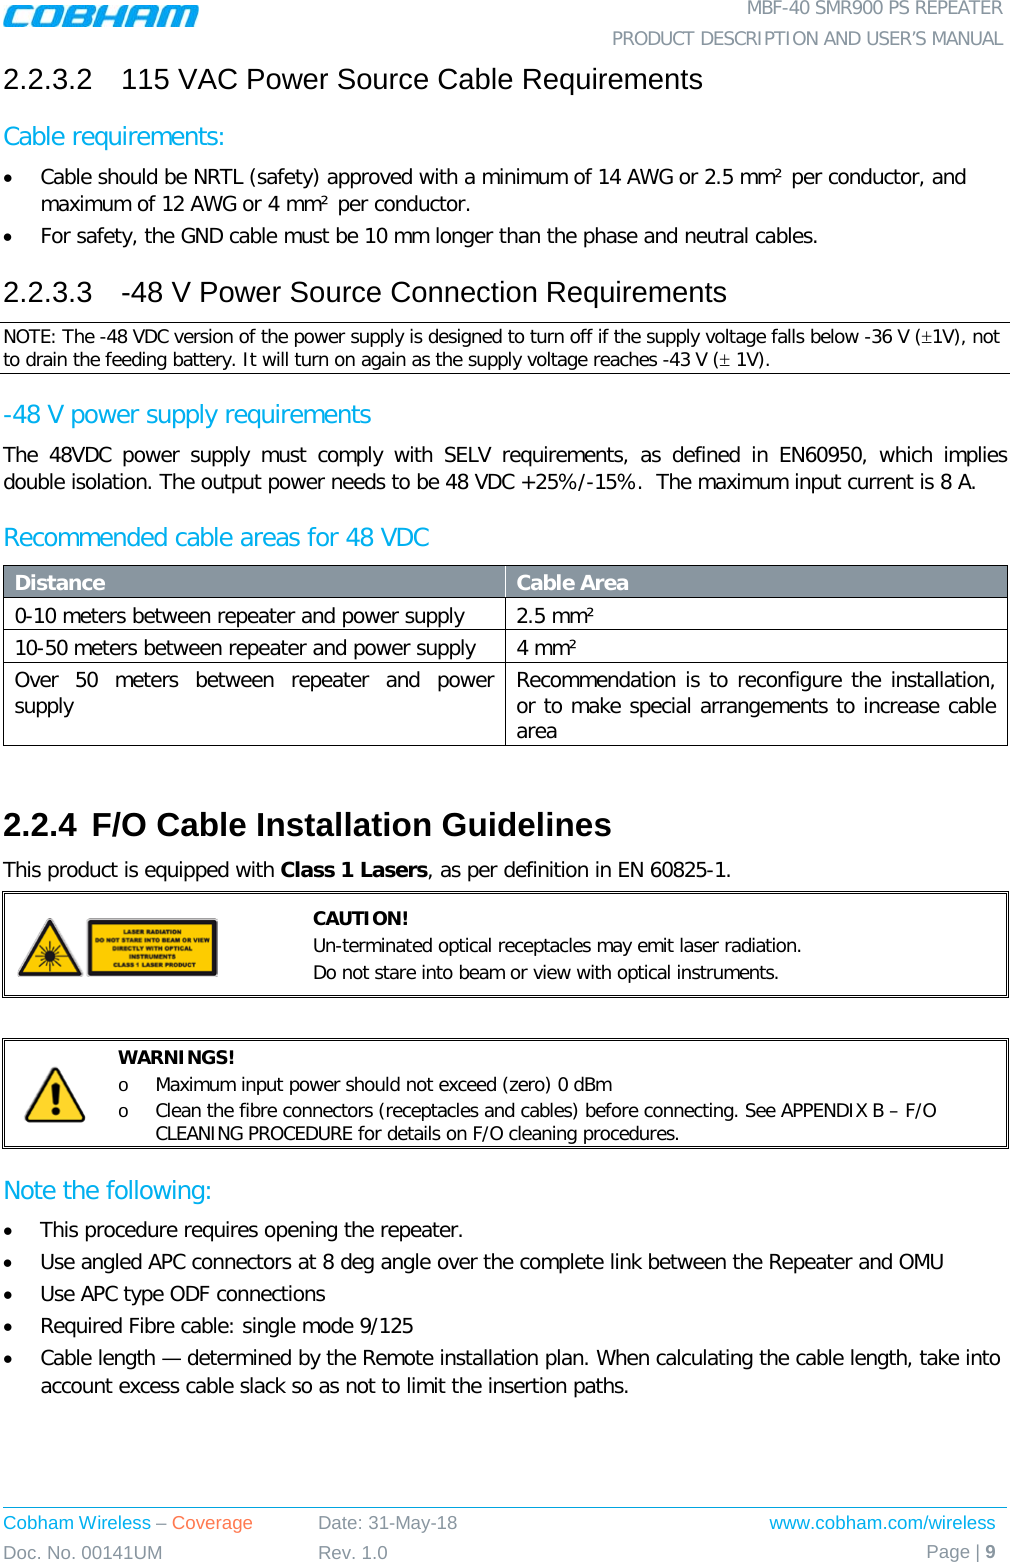  MBF-40 SMR900 PS REPEATER PRODUCT DESCRIPTION AND USER’S MANUAL Cobham Wireless – Coverage Date: 31-May-18 www.cobham.com/wireless Doc. No. 00141UM Rev. 1.0 Page | 9  2.2.3.2  115 VAC Power Source Cable Requirements Cable requirements:  • Cable should be NRTL (safety) approved with a minimum of 14 AWG or 2.5 mm² per conductor, and maximum of 12 AWG or 4 mm² per conductor. • For safety, the GND cable must be 10 mm longer than the phase and neutral cables. 2.2.3.3  -48 V Power Source Connection Requirements NOTE: The -48 VDC version of the power supply is designed to turn off if the supply voltage falls below -36 V (±1V), not to drain the feeding battery. It will turn on again as the supply voltage reaches -43 V (± 1V). -48 V power supply requirements The 48VDC power supply must comply with SELV requirements, as defined in EN60950, which implies double isolation. The output power needs to be 48 VDC +25%/-15%.  The maximum input current is 8 A. Recommended cable areas for 48 VDC Distance Cable Area 0-10 meters between repeater and power supply  2.5 mm² 10-50 meters between repeater and power supply 4 mm² Over 50 meters between repeater and power supply  Recommendation is to reconfigure the installation, or to make special arrangements to increase cable area  2.2.4 F/O Cable Installation Guidelines This product is equipped with Class 1 Lasers, as per definition in EN 60825-1.   CAUTION! Un-terminated optical receptacles may emit laser radiation.  Do not stare into beam or view with optical instruments.   WARNINGS! o Maximum input power should not exceed (zero) 0 dBm o Clean the fibre connectors (receptacles and cables) before connecting. See APPENDIX B – F/O CLEANING PROCEDURE for details on F/O cleaning procedures. Note the following: • This procedure requires opening the repeater. • Use angled APC connectors at 8 deg angle over the complete link between the Repeater and OMU • Use APC type ODF connections • Required Fibre cable: single mode 9/125 • Cable length — determined by the Remote installation plan. When calculating the cable length, take into account excess cable slack so as not to limit the insertion paths. 